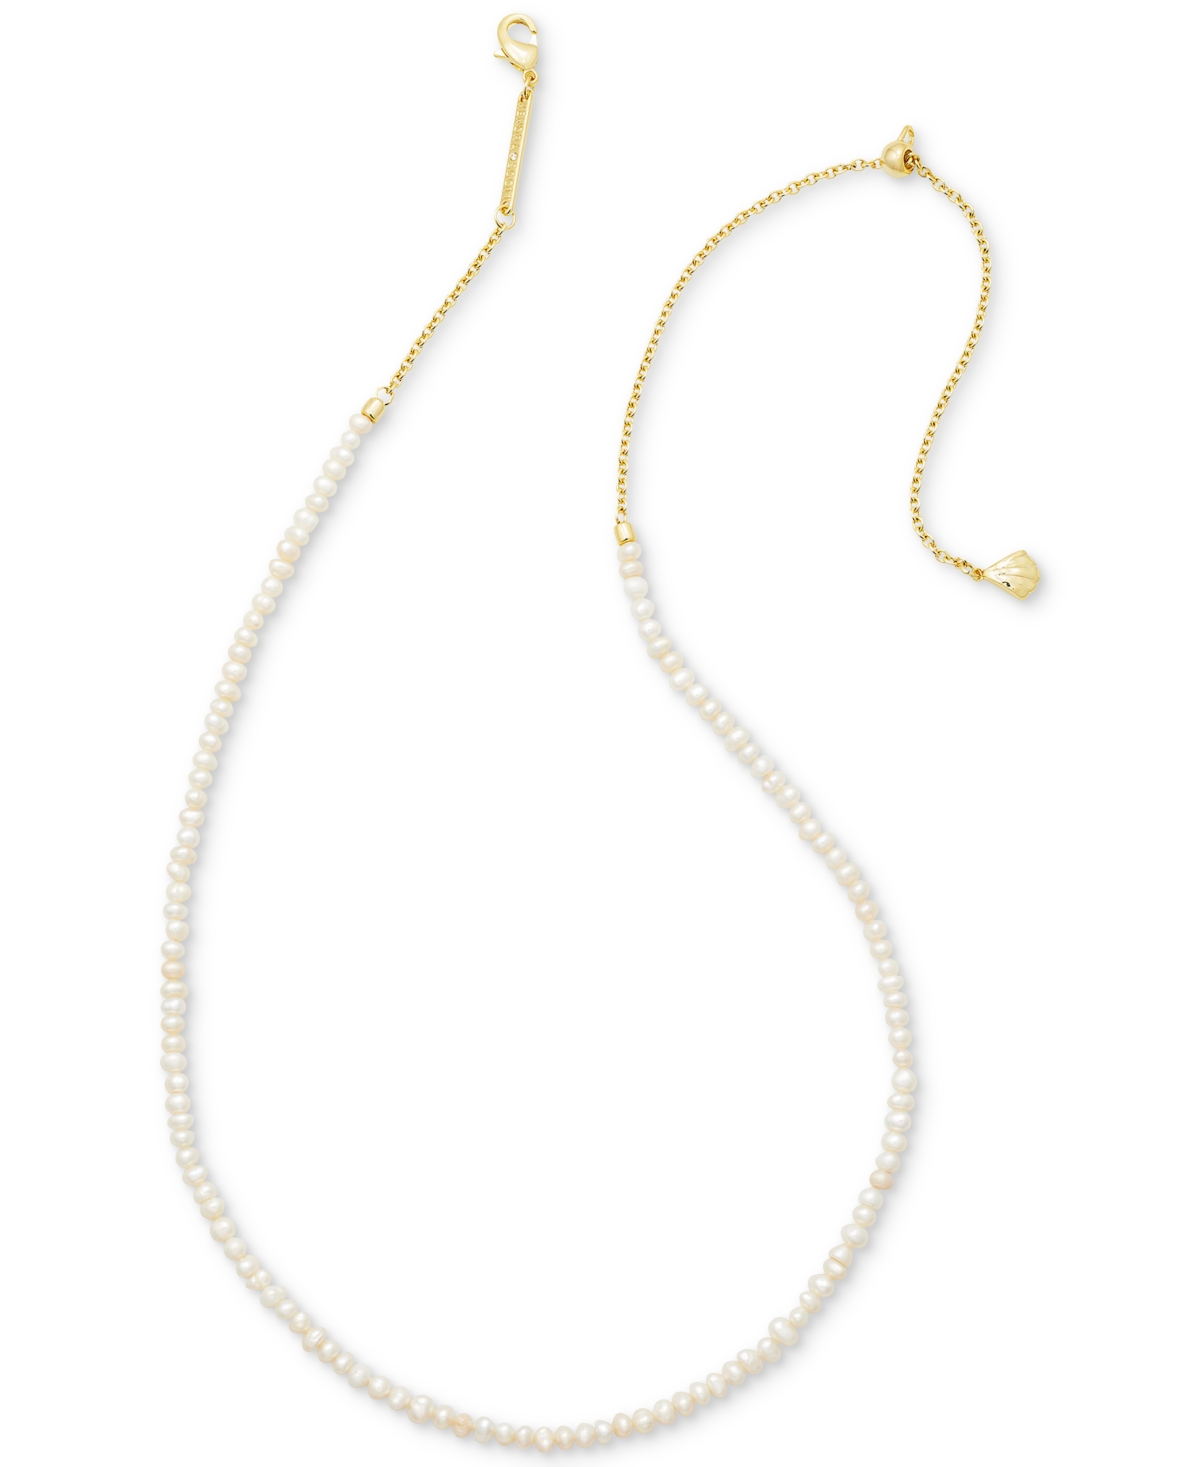 14k Gold-Plated Cultured Freshwater Pearl 19" Strand Necklace - Gold White